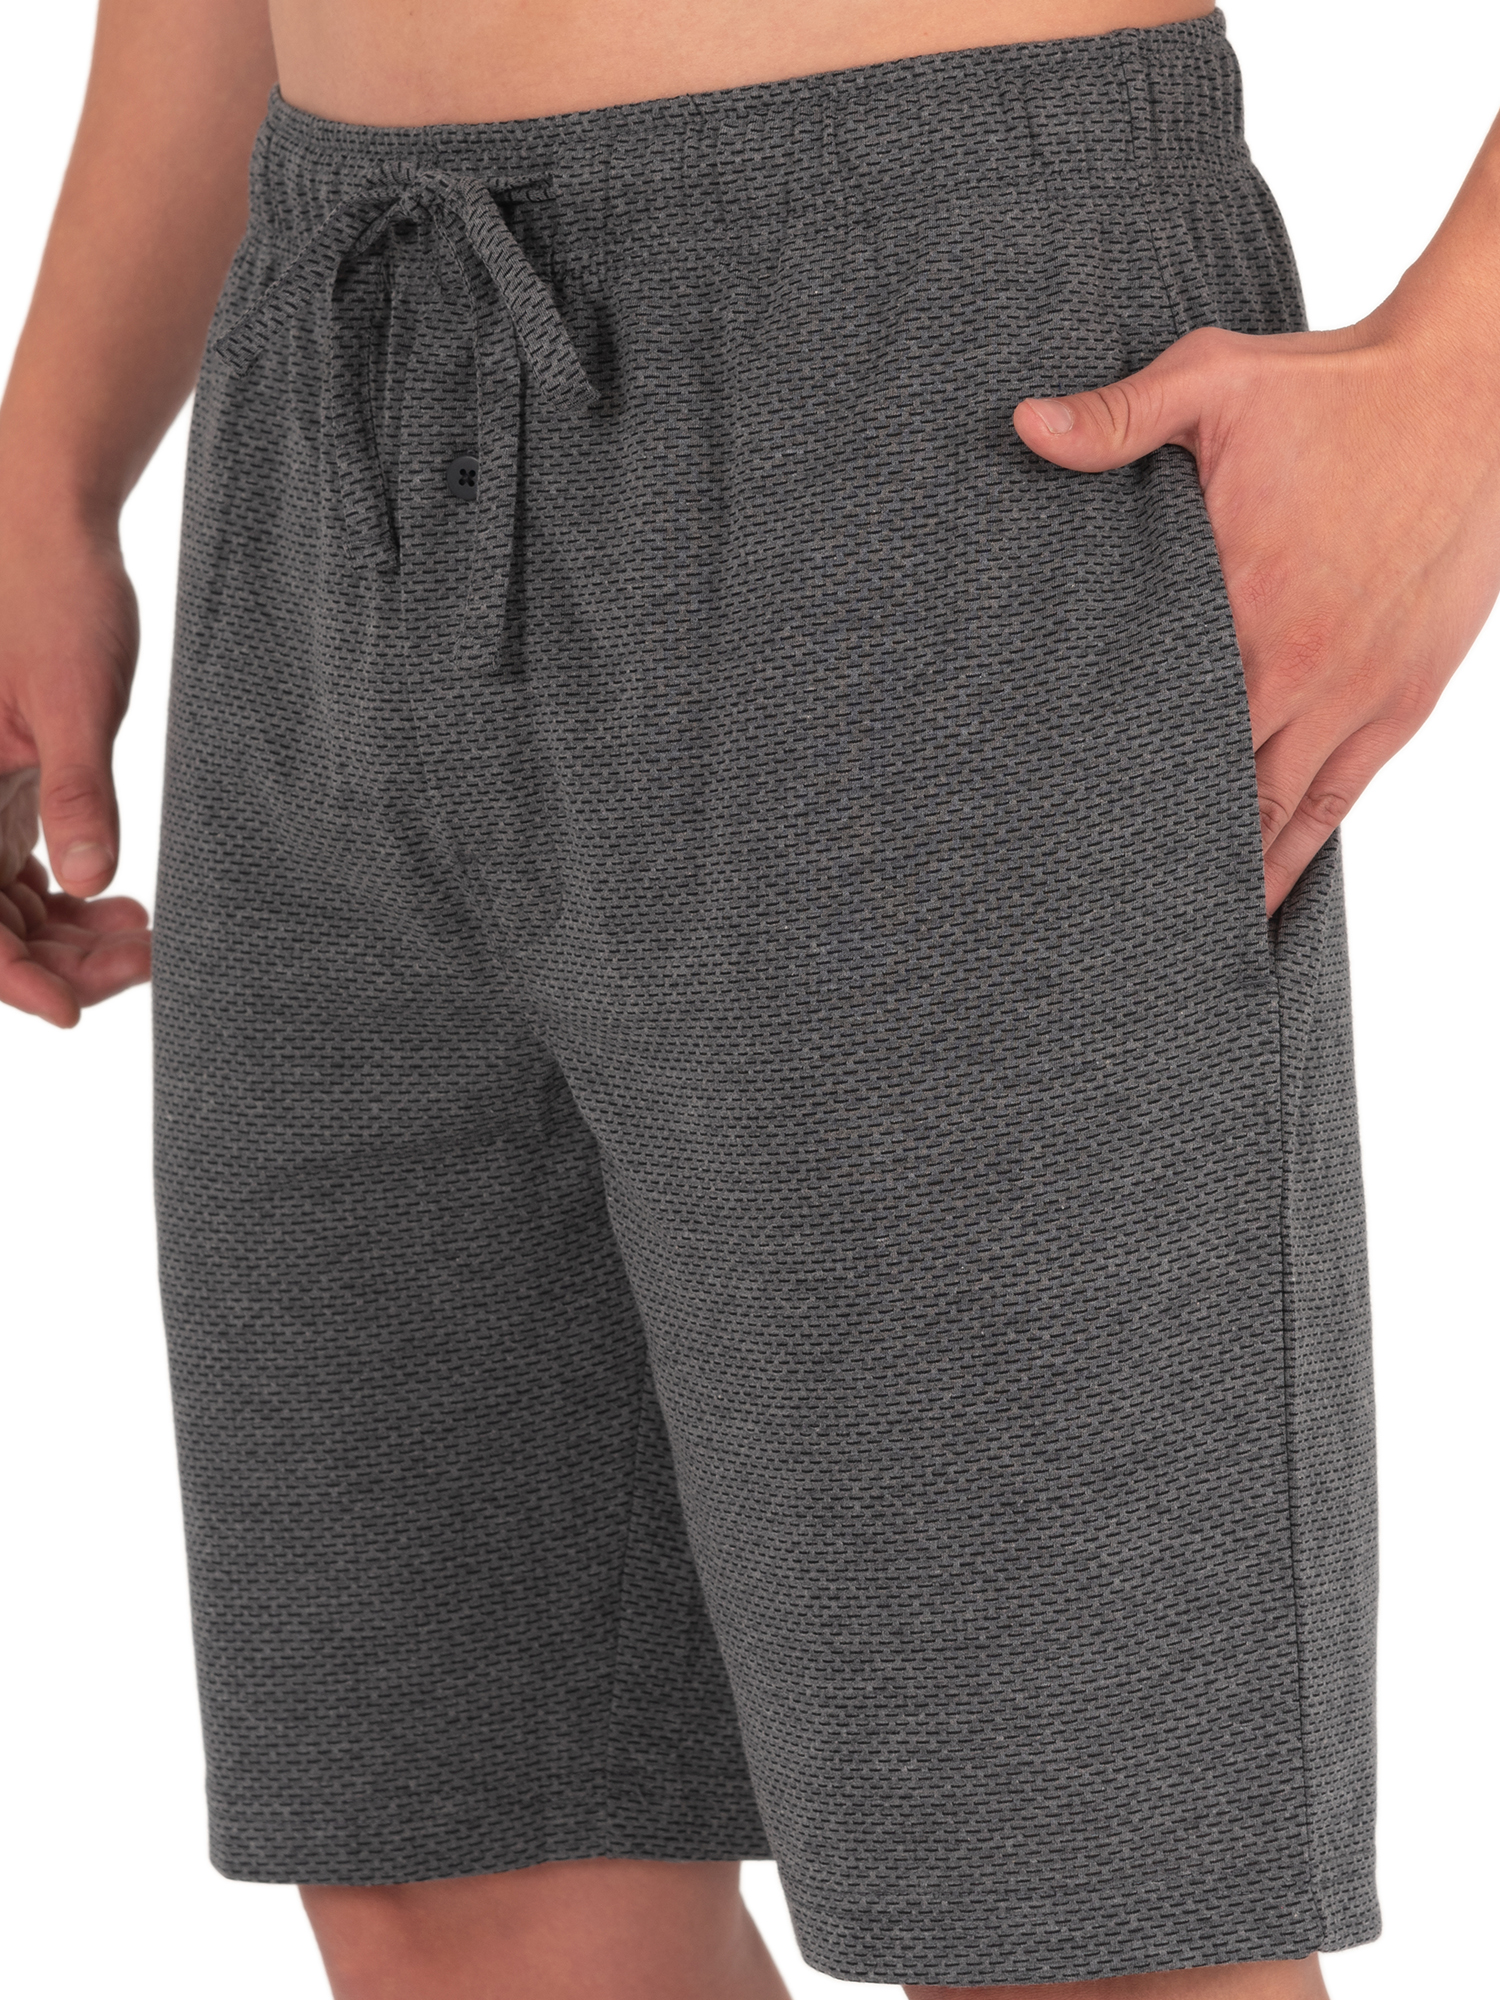 Fruit of the Loom Men's and Big Men’s Breathable Mesh 2-Pack Knit Sleep Pajama Short, S-5XL - image 3 of 6